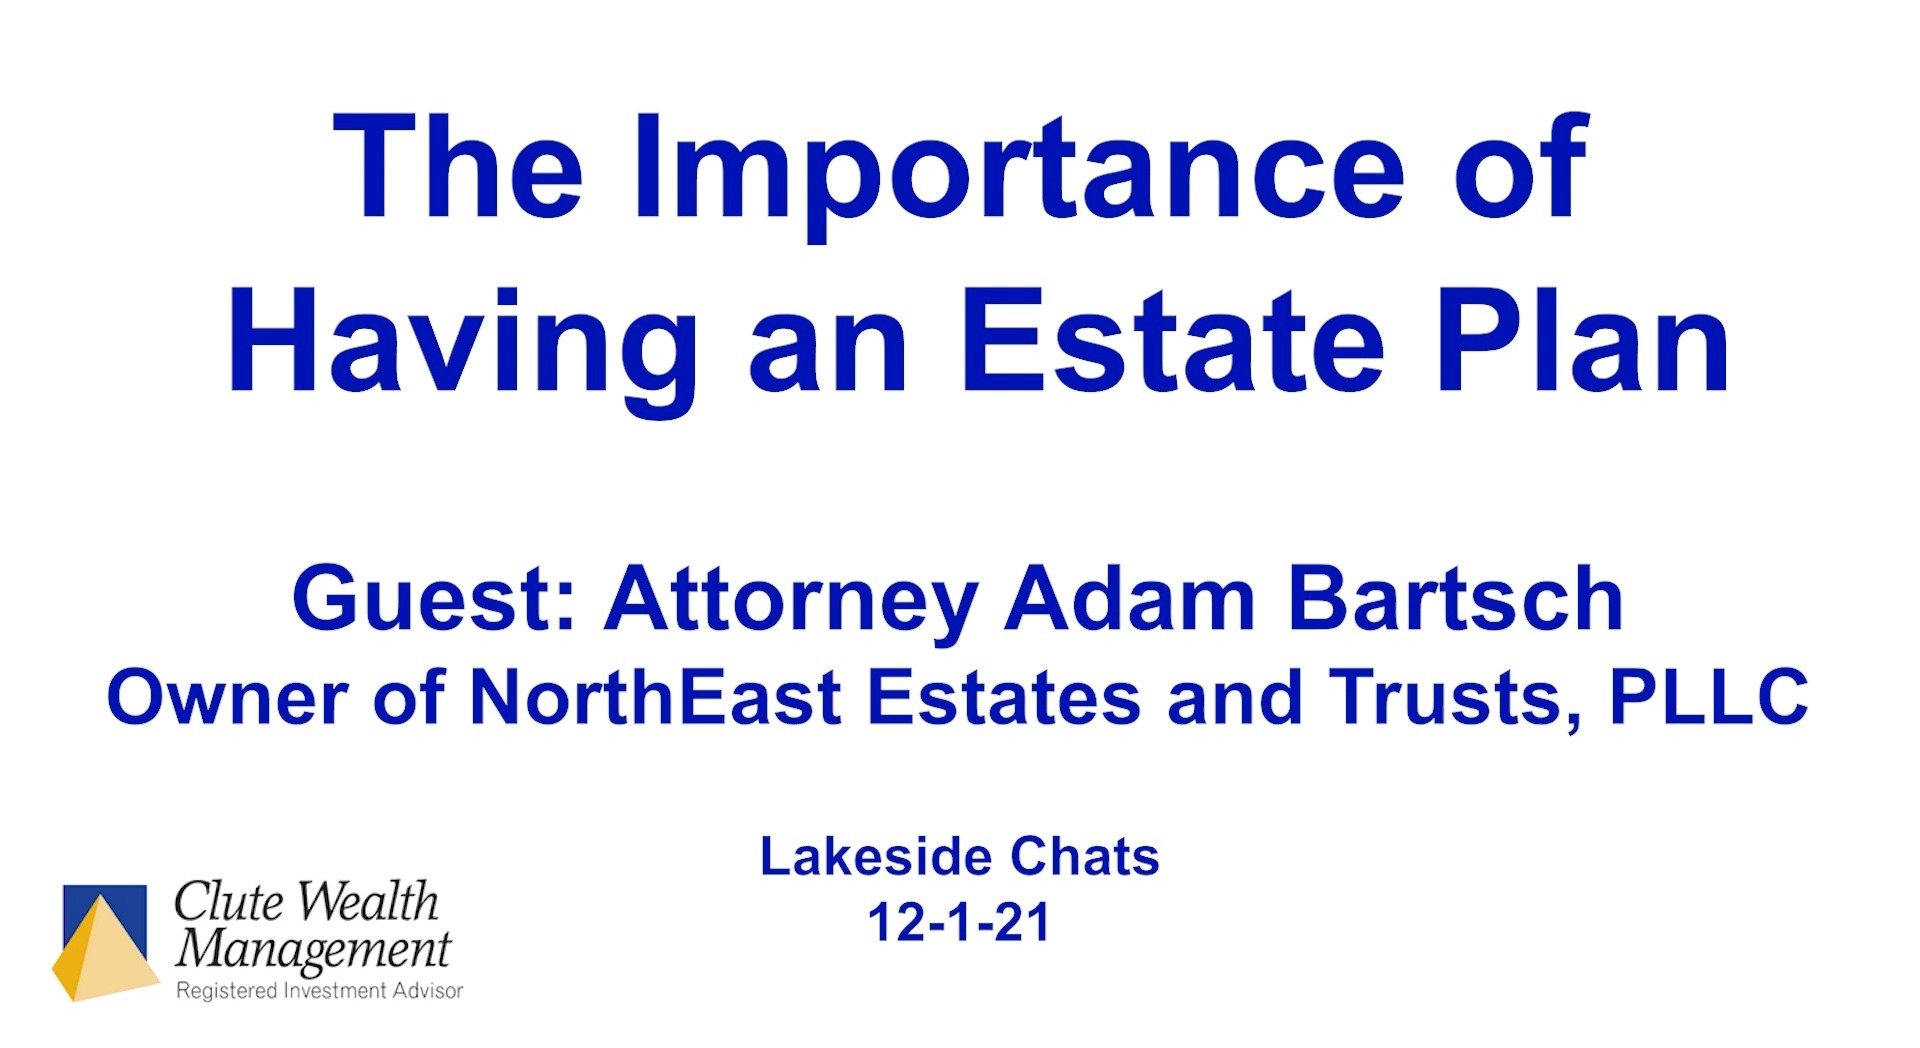 The Importance of Having an Estate Plan. Guest: Attorney Adam bartsch owner of NorthEast Estates and Trusts, PLLC. Lakeside Chats 12-1-21